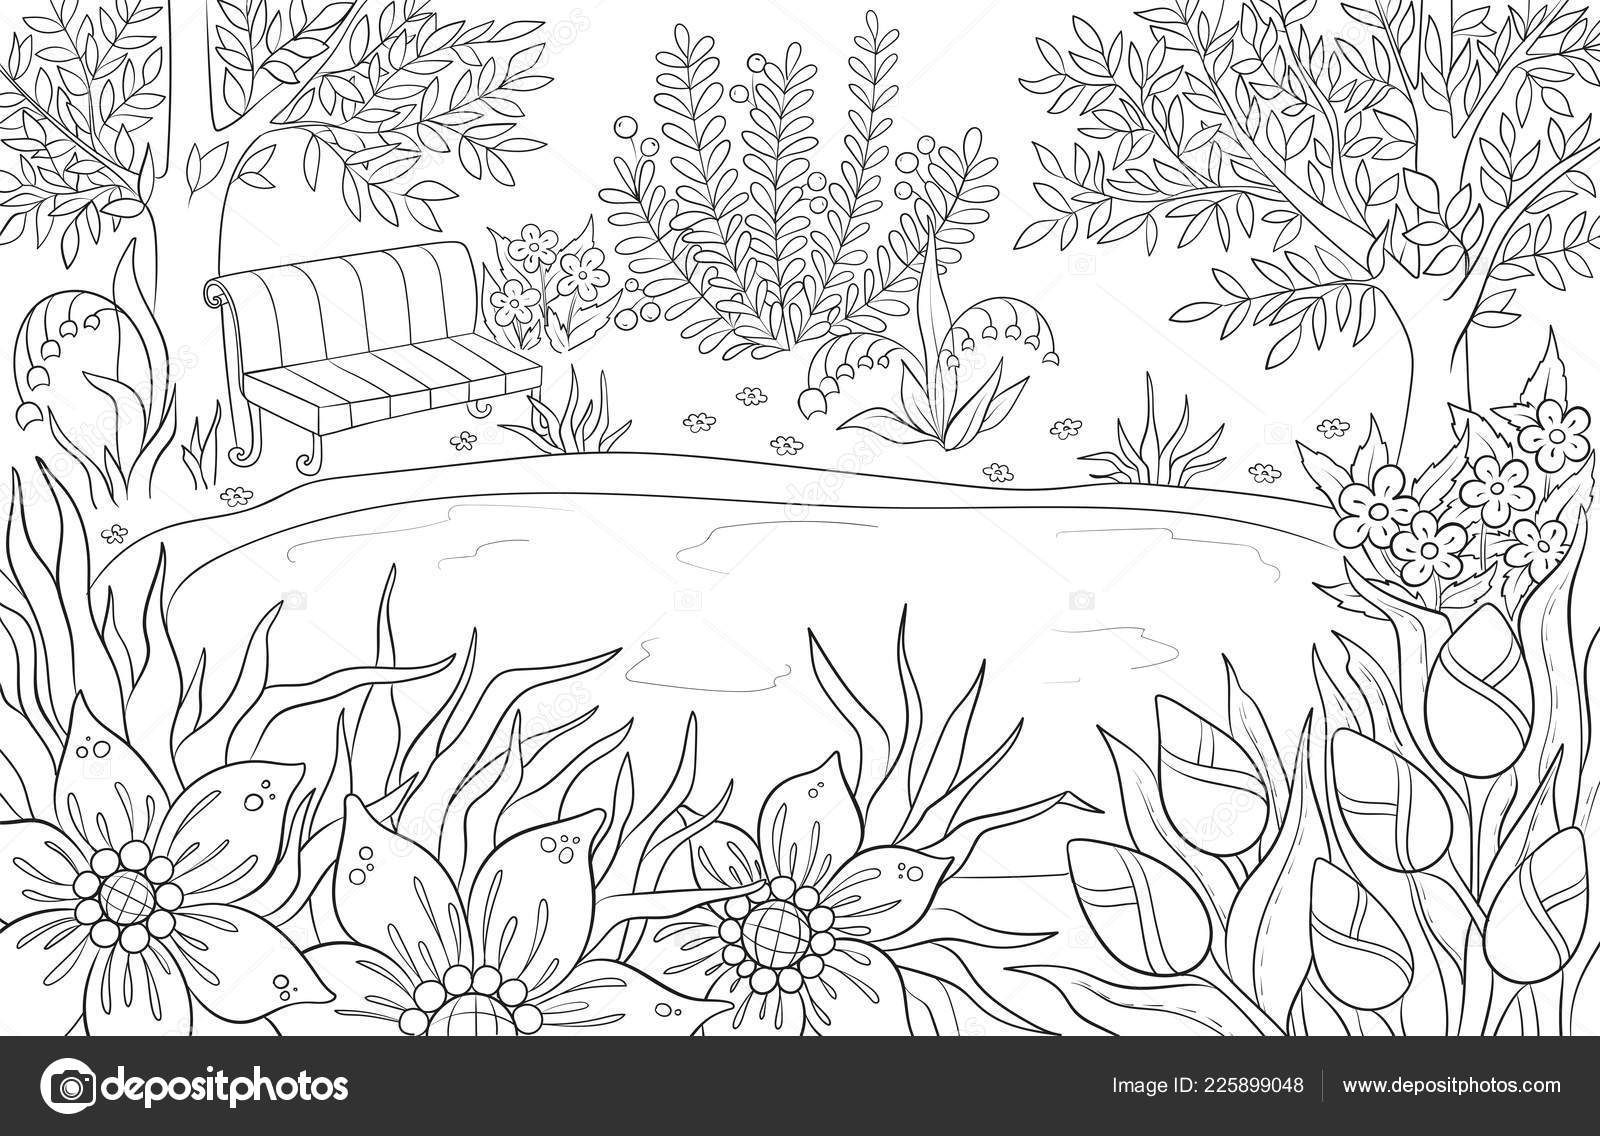 Garden Scenery Coloring Pages For Adults / My friend tasha goddard is a